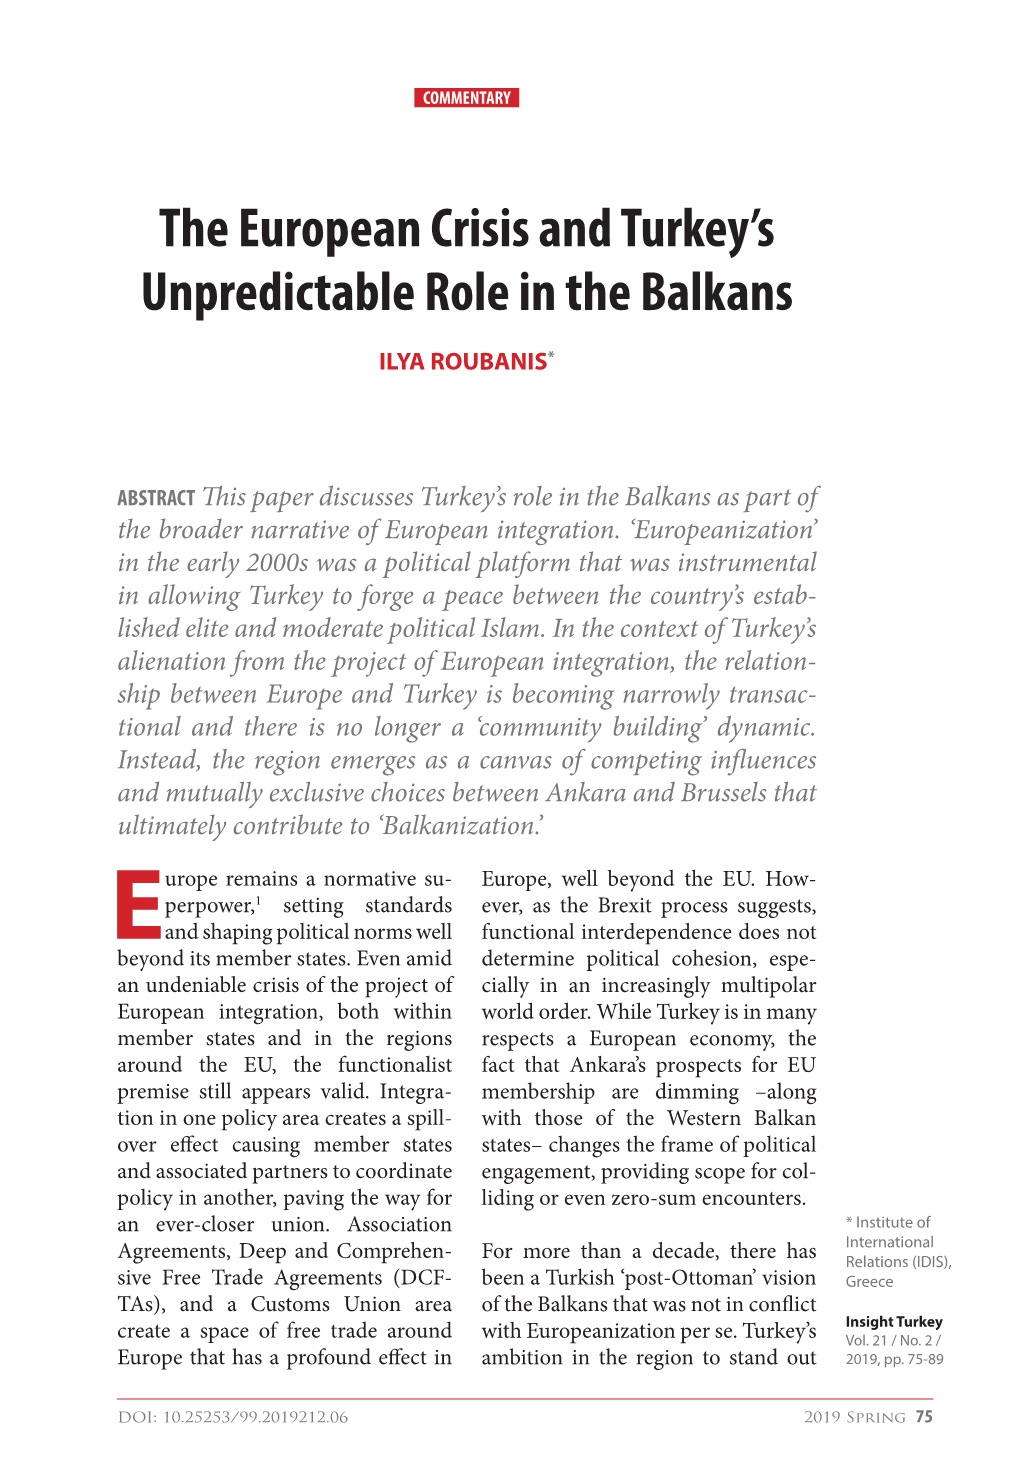 The European Crisis and Turkey's Unpredictable Role in the Balkans